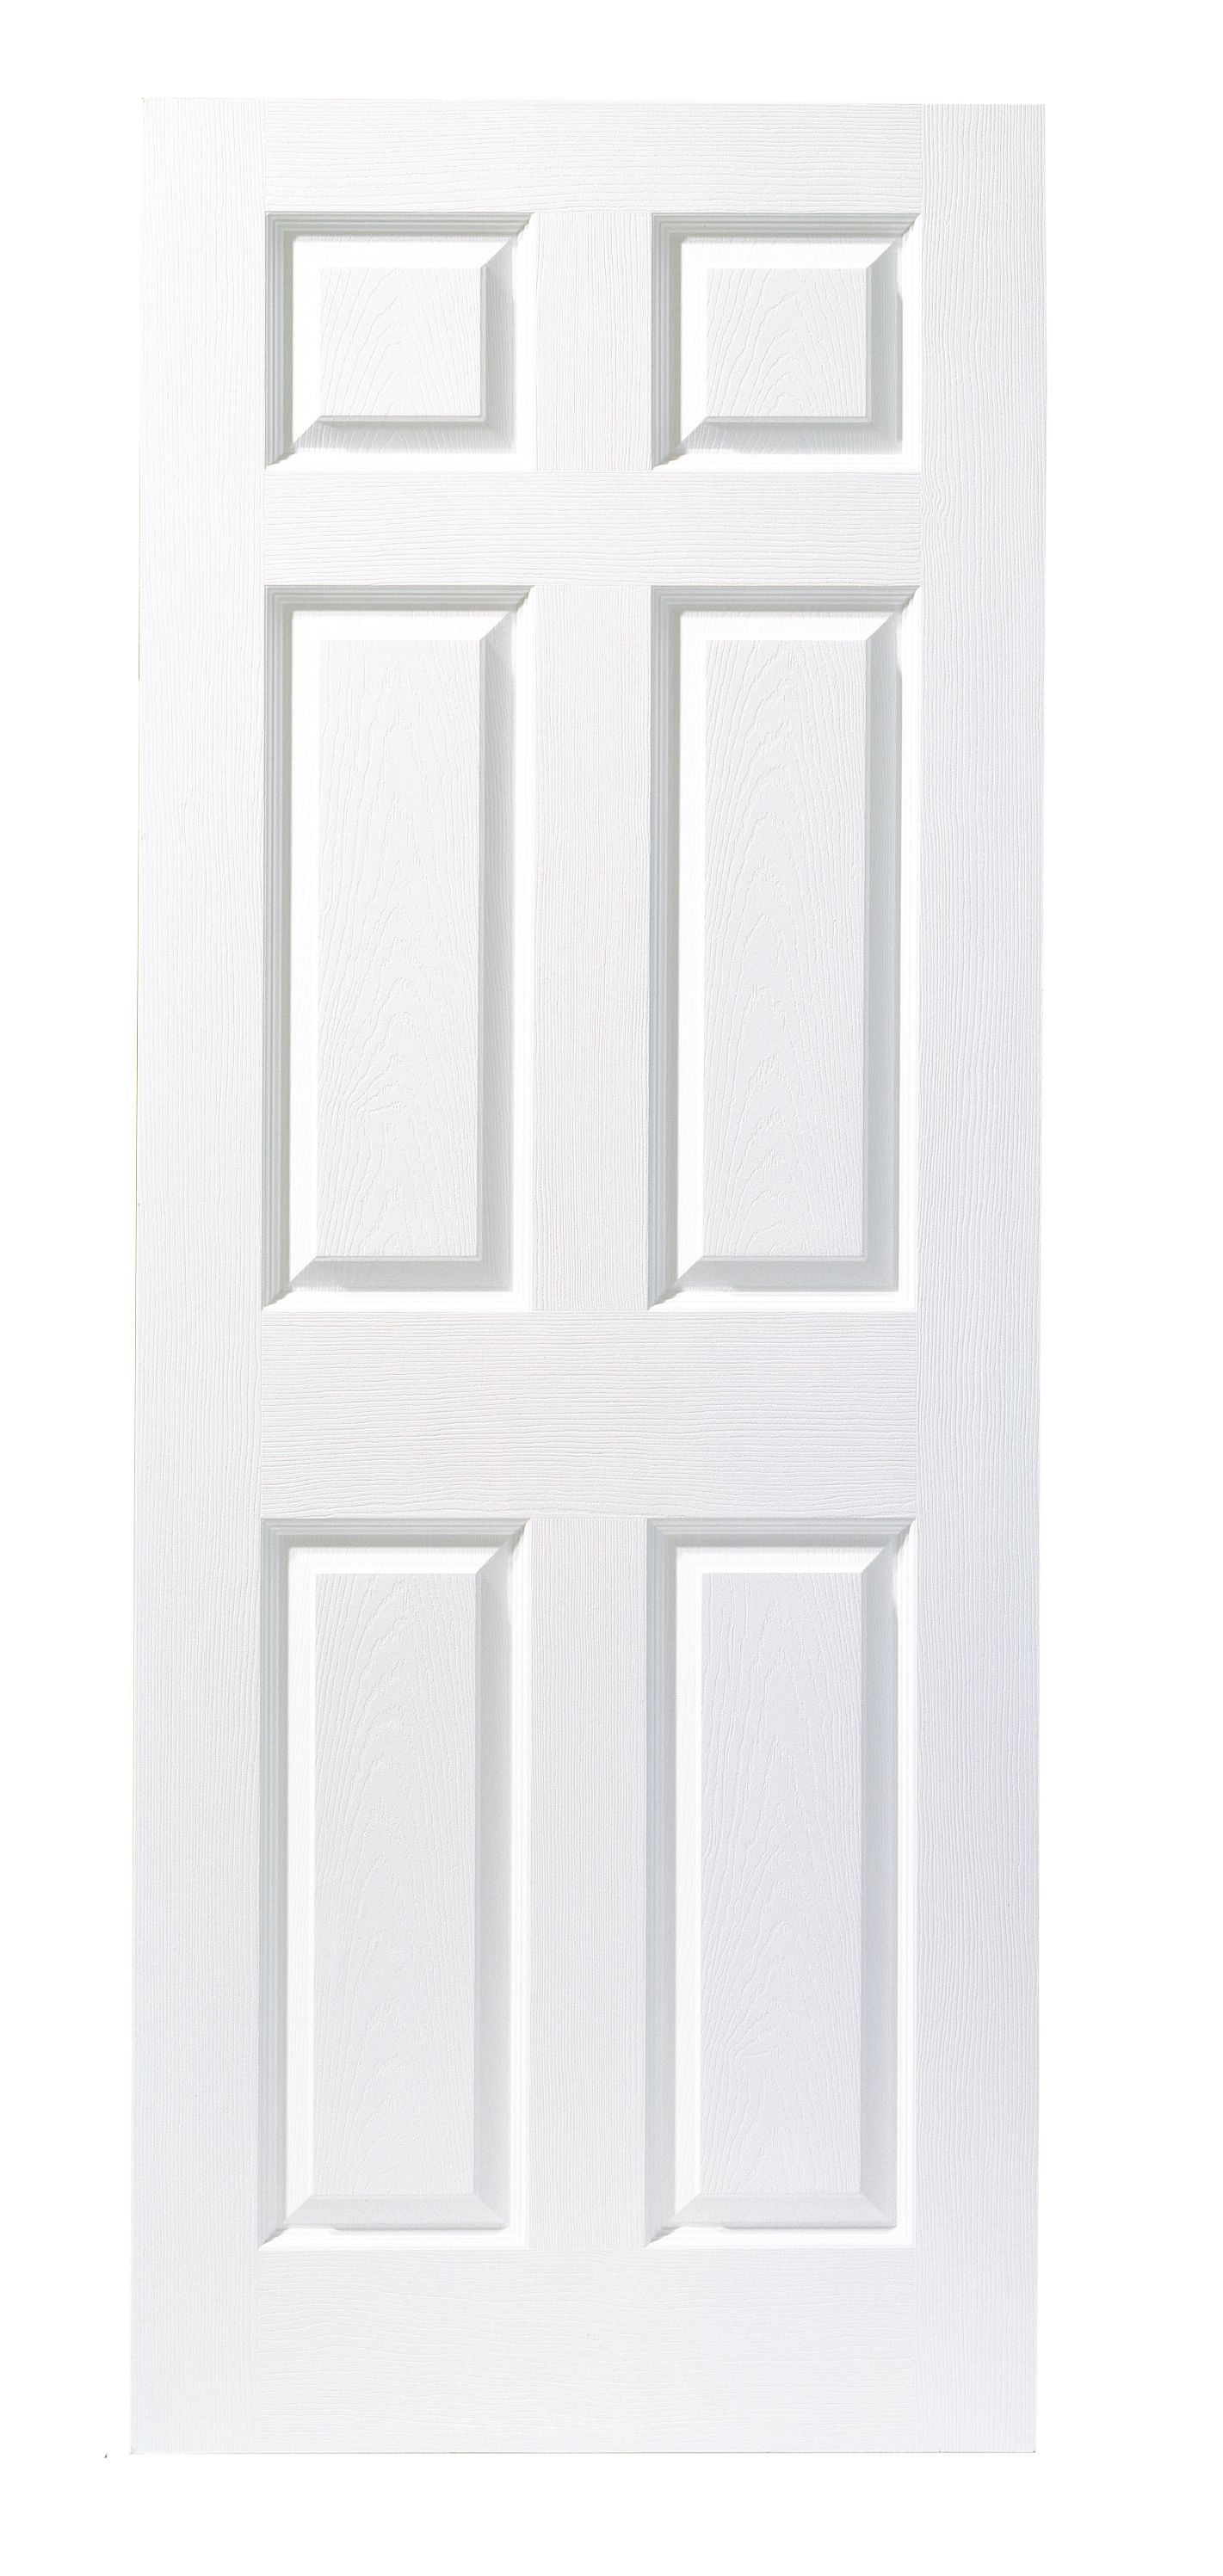 Wickes Lincoln White Grained Moulded 6 Panel Internal Fire Door - 1981 mm